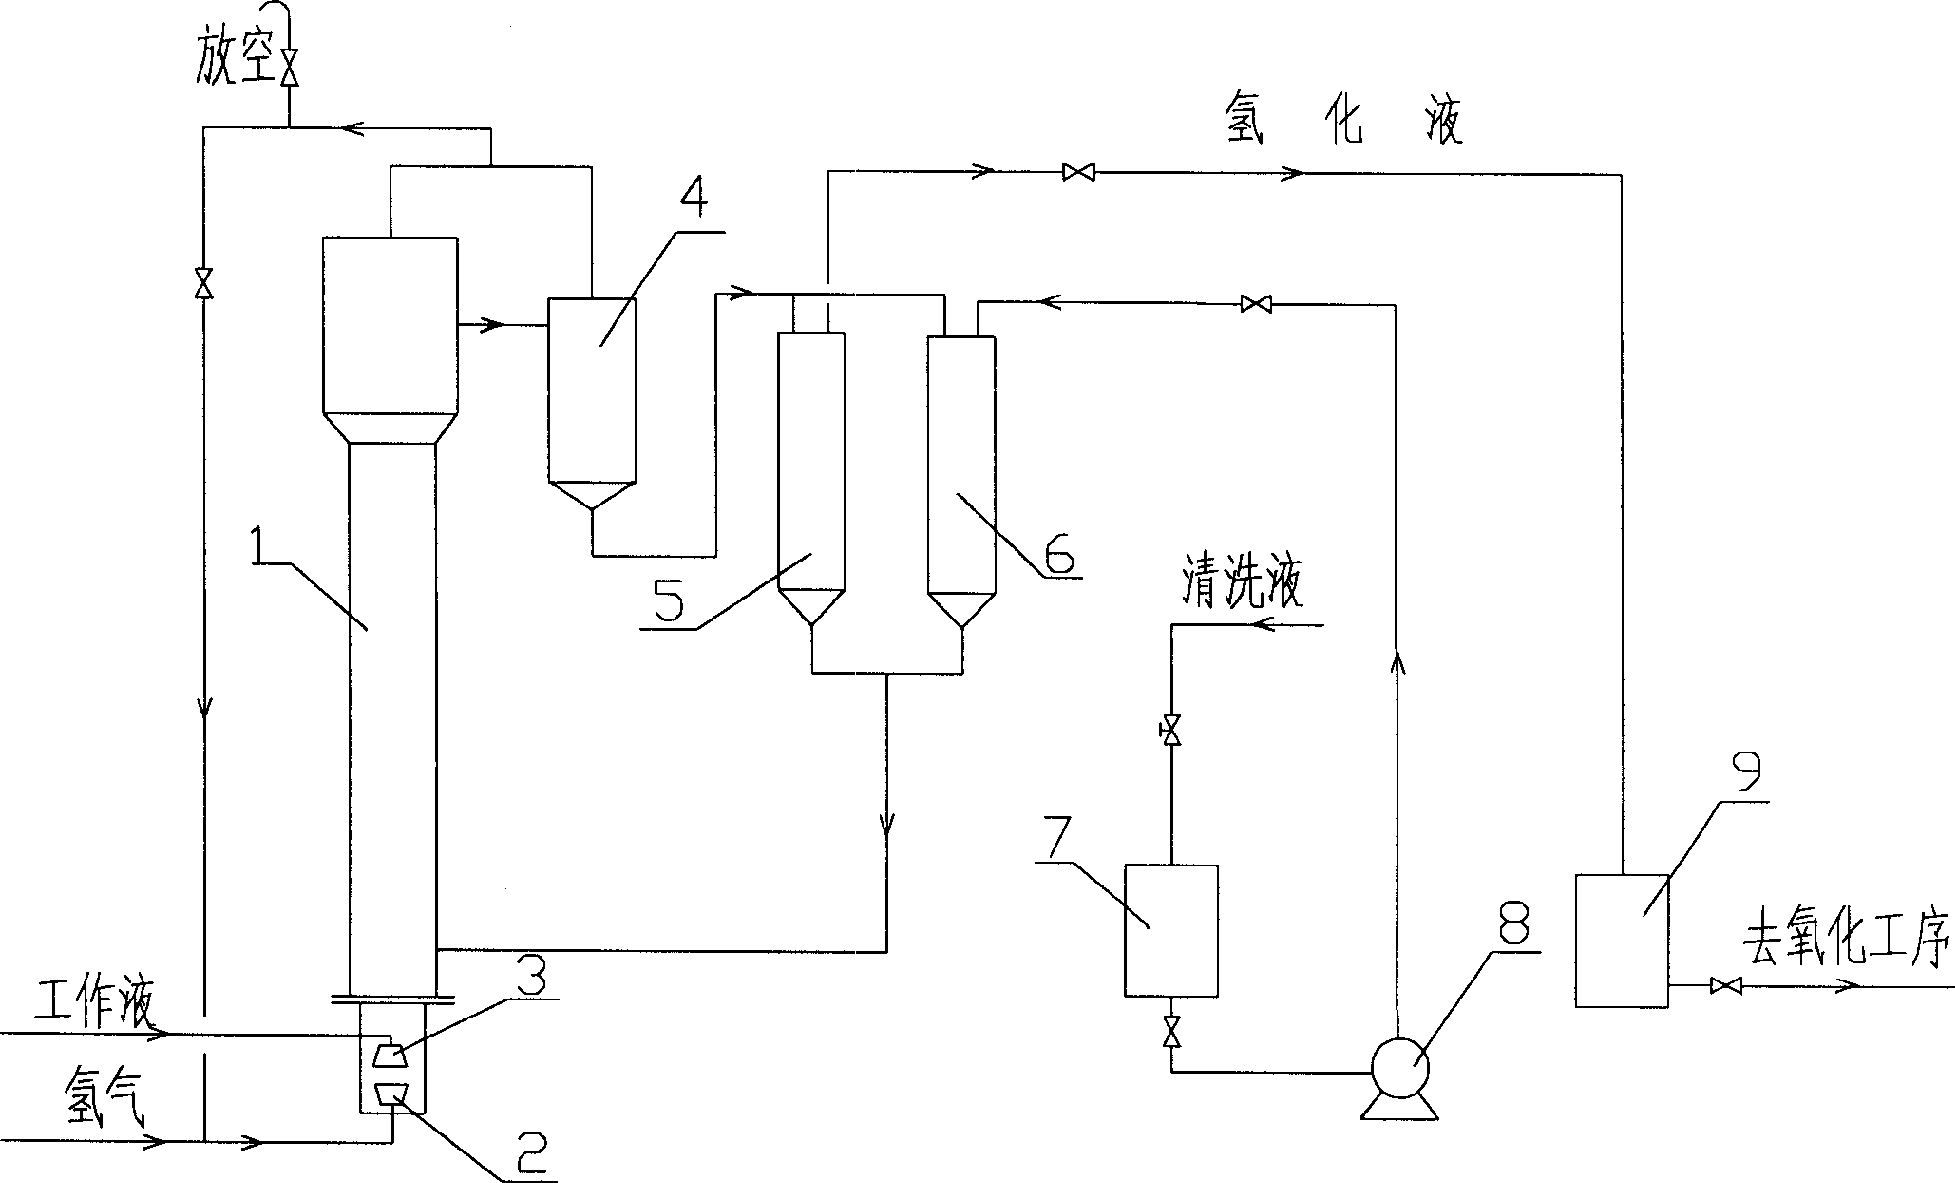 Hydrogenation process of hydrogen peroxide fluidized bed by anthraquinone